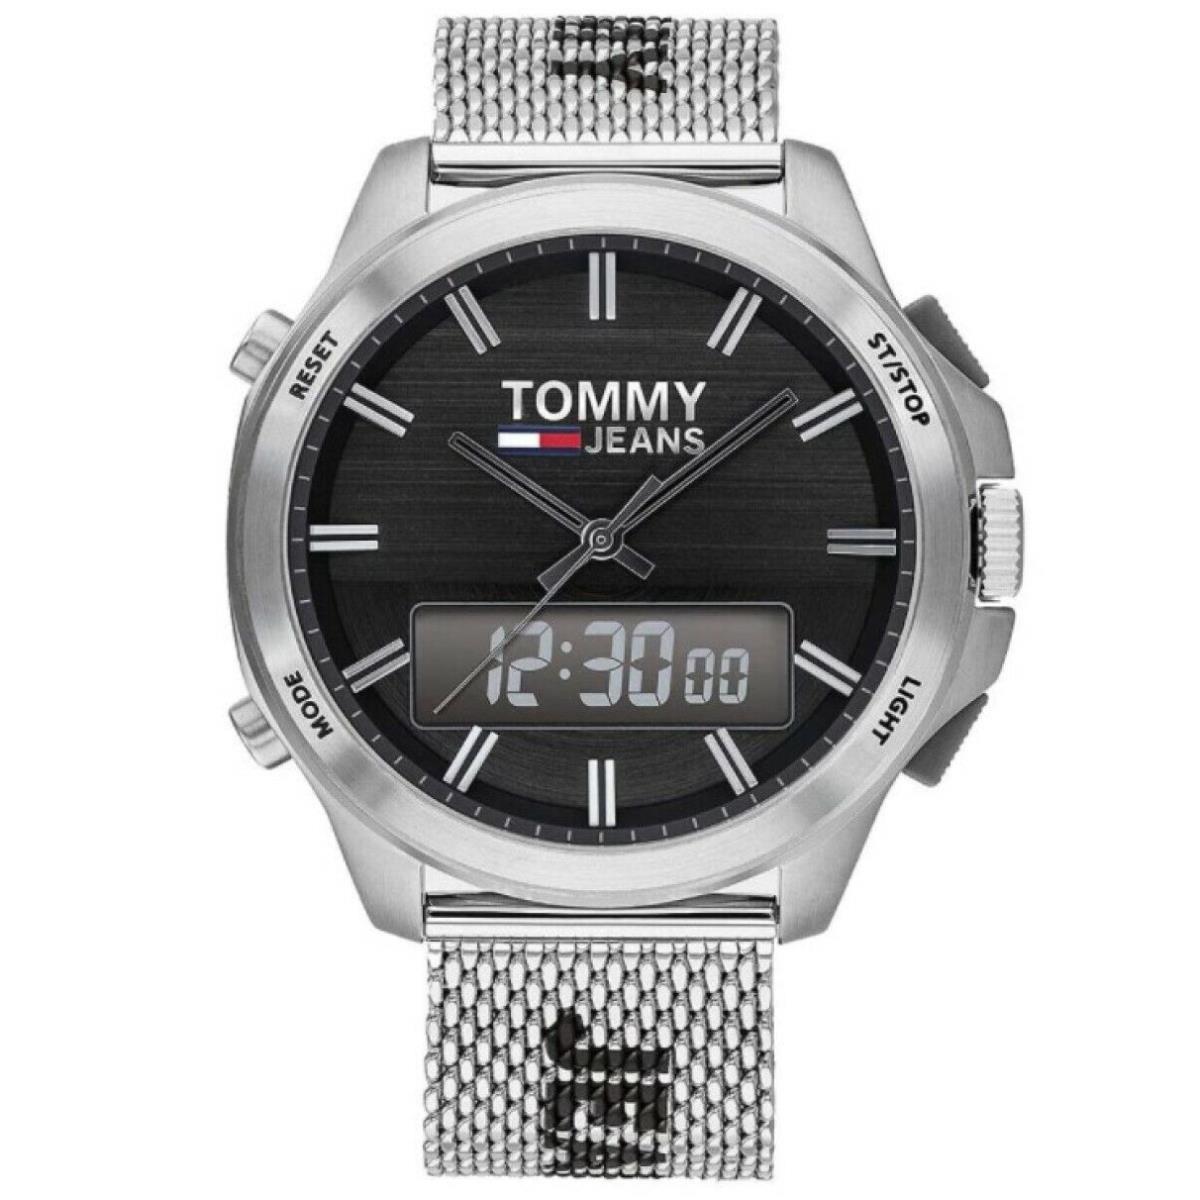 Tommy Hilfiger 1791765 Stainless Steel Tommy Jeans Analog Digital Men`s Watch